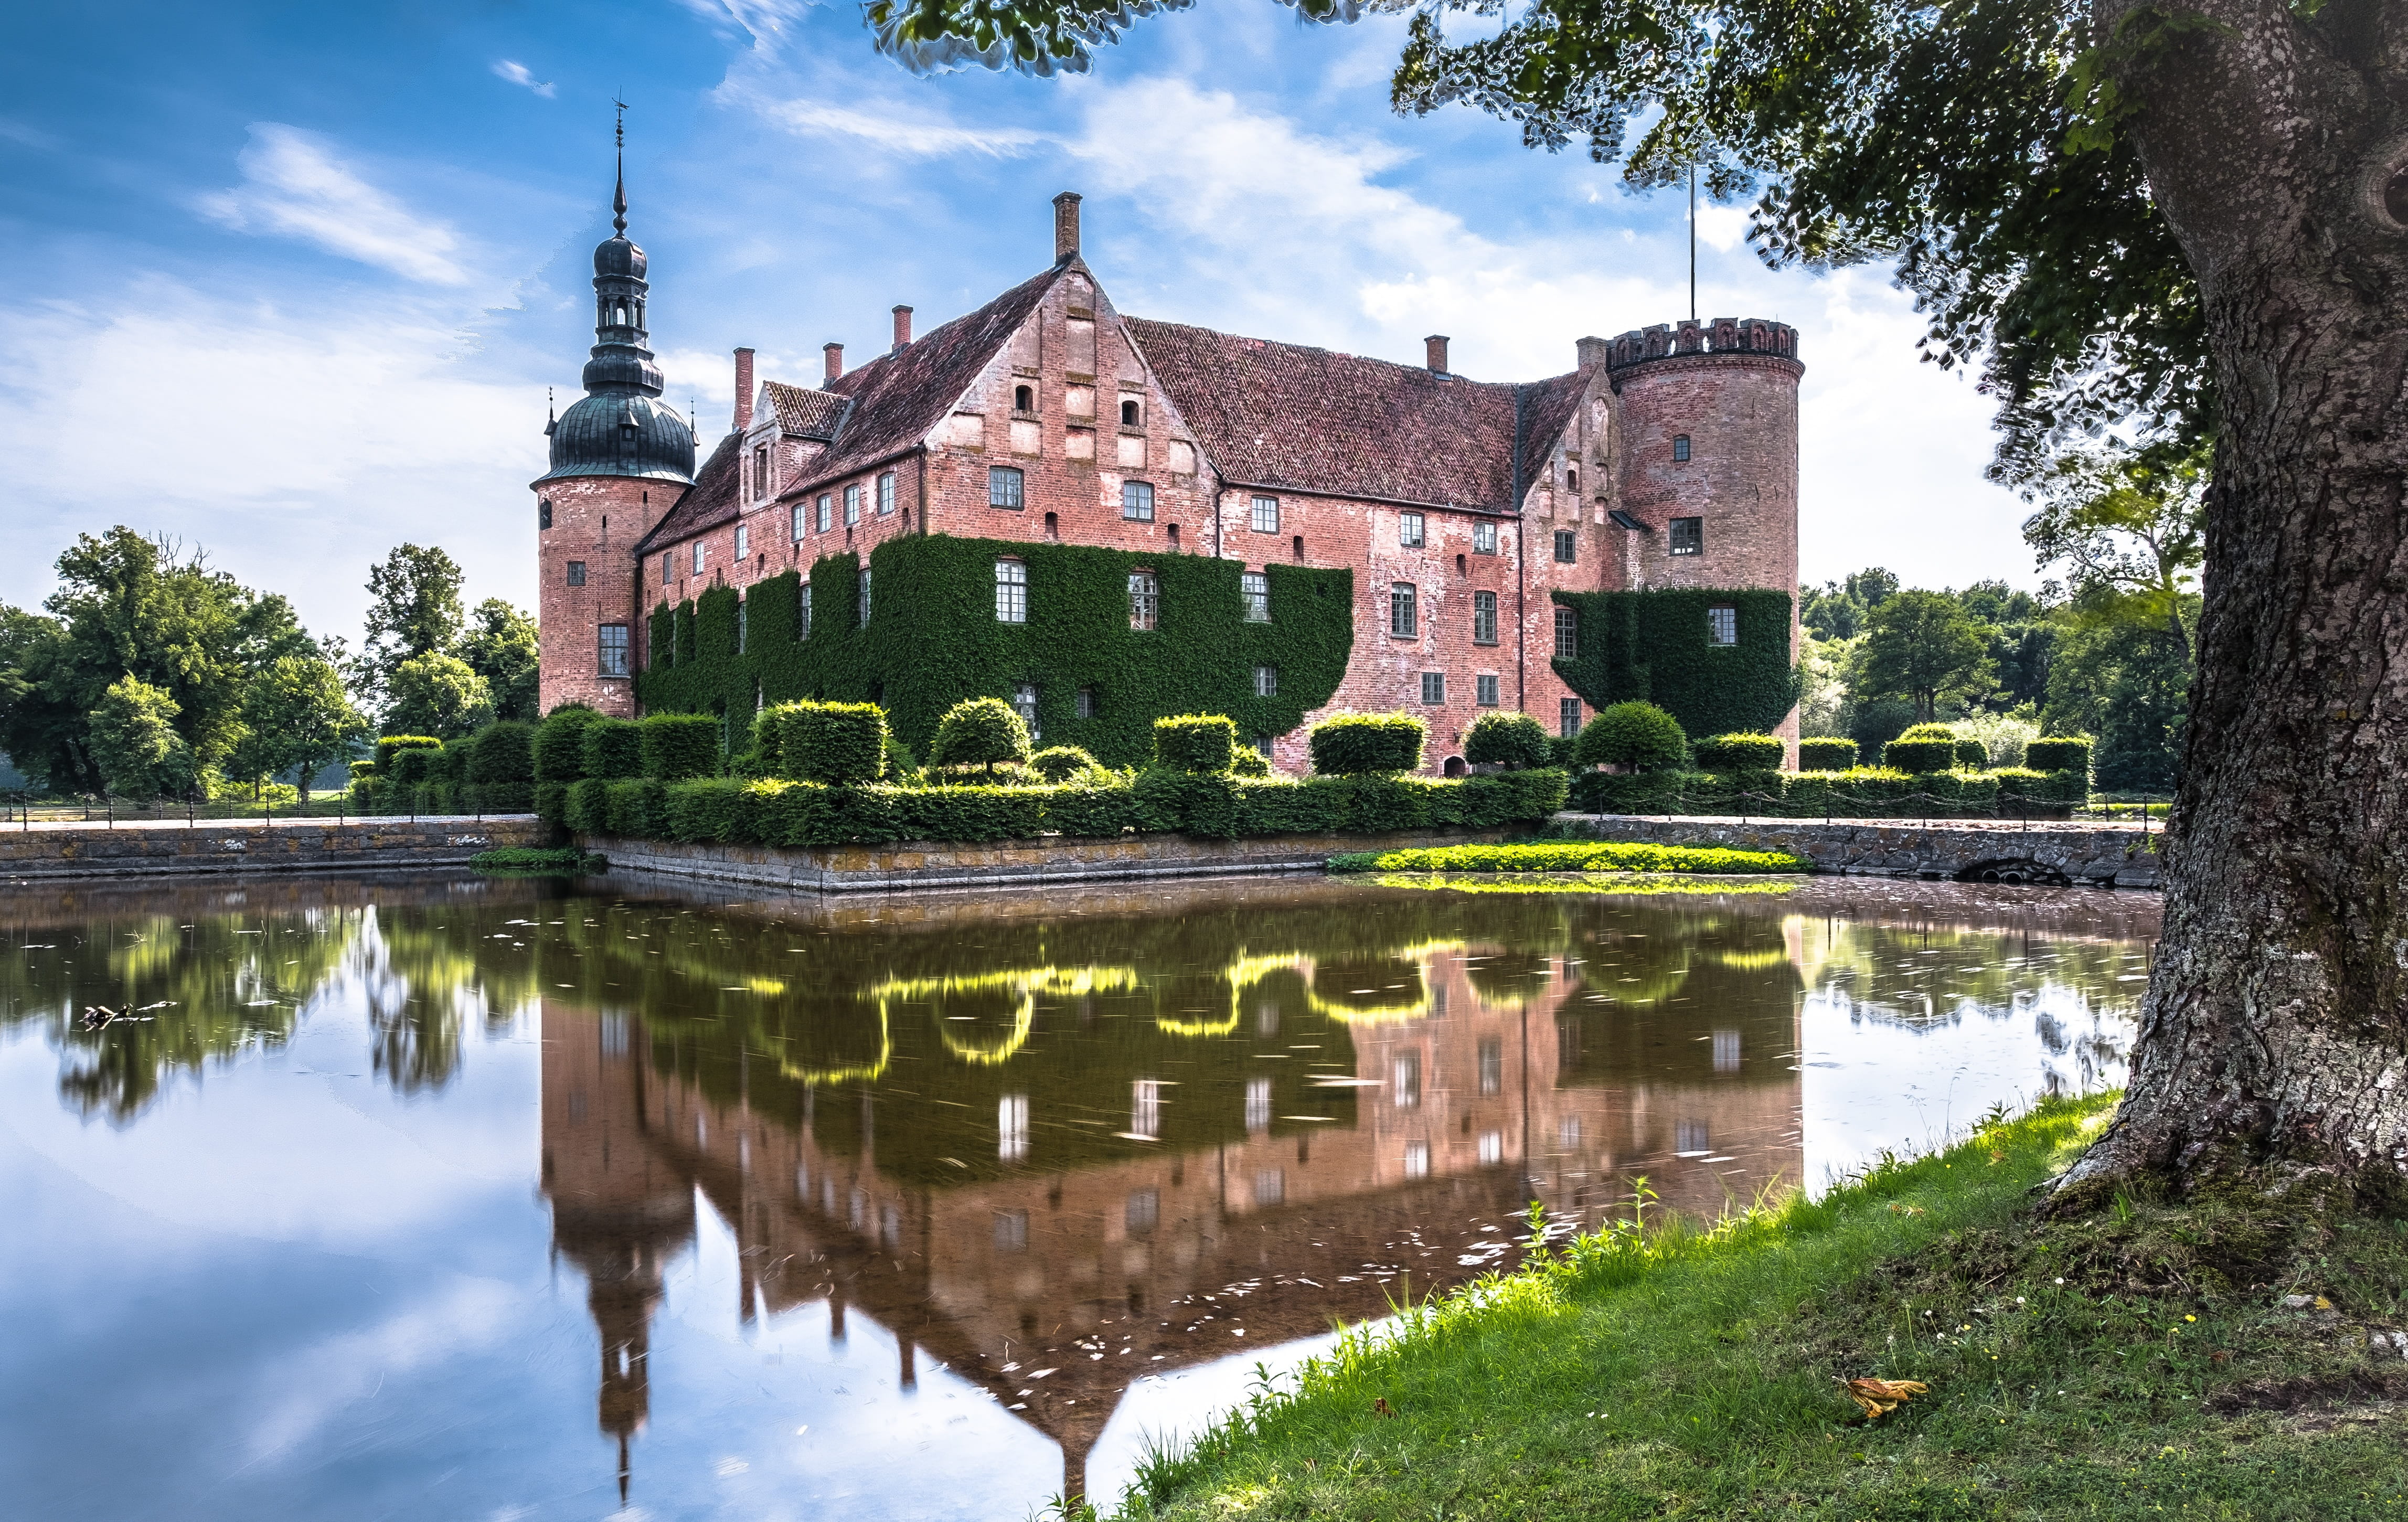 mansion in between bodies of water, sweden, moated castle, southern sweden